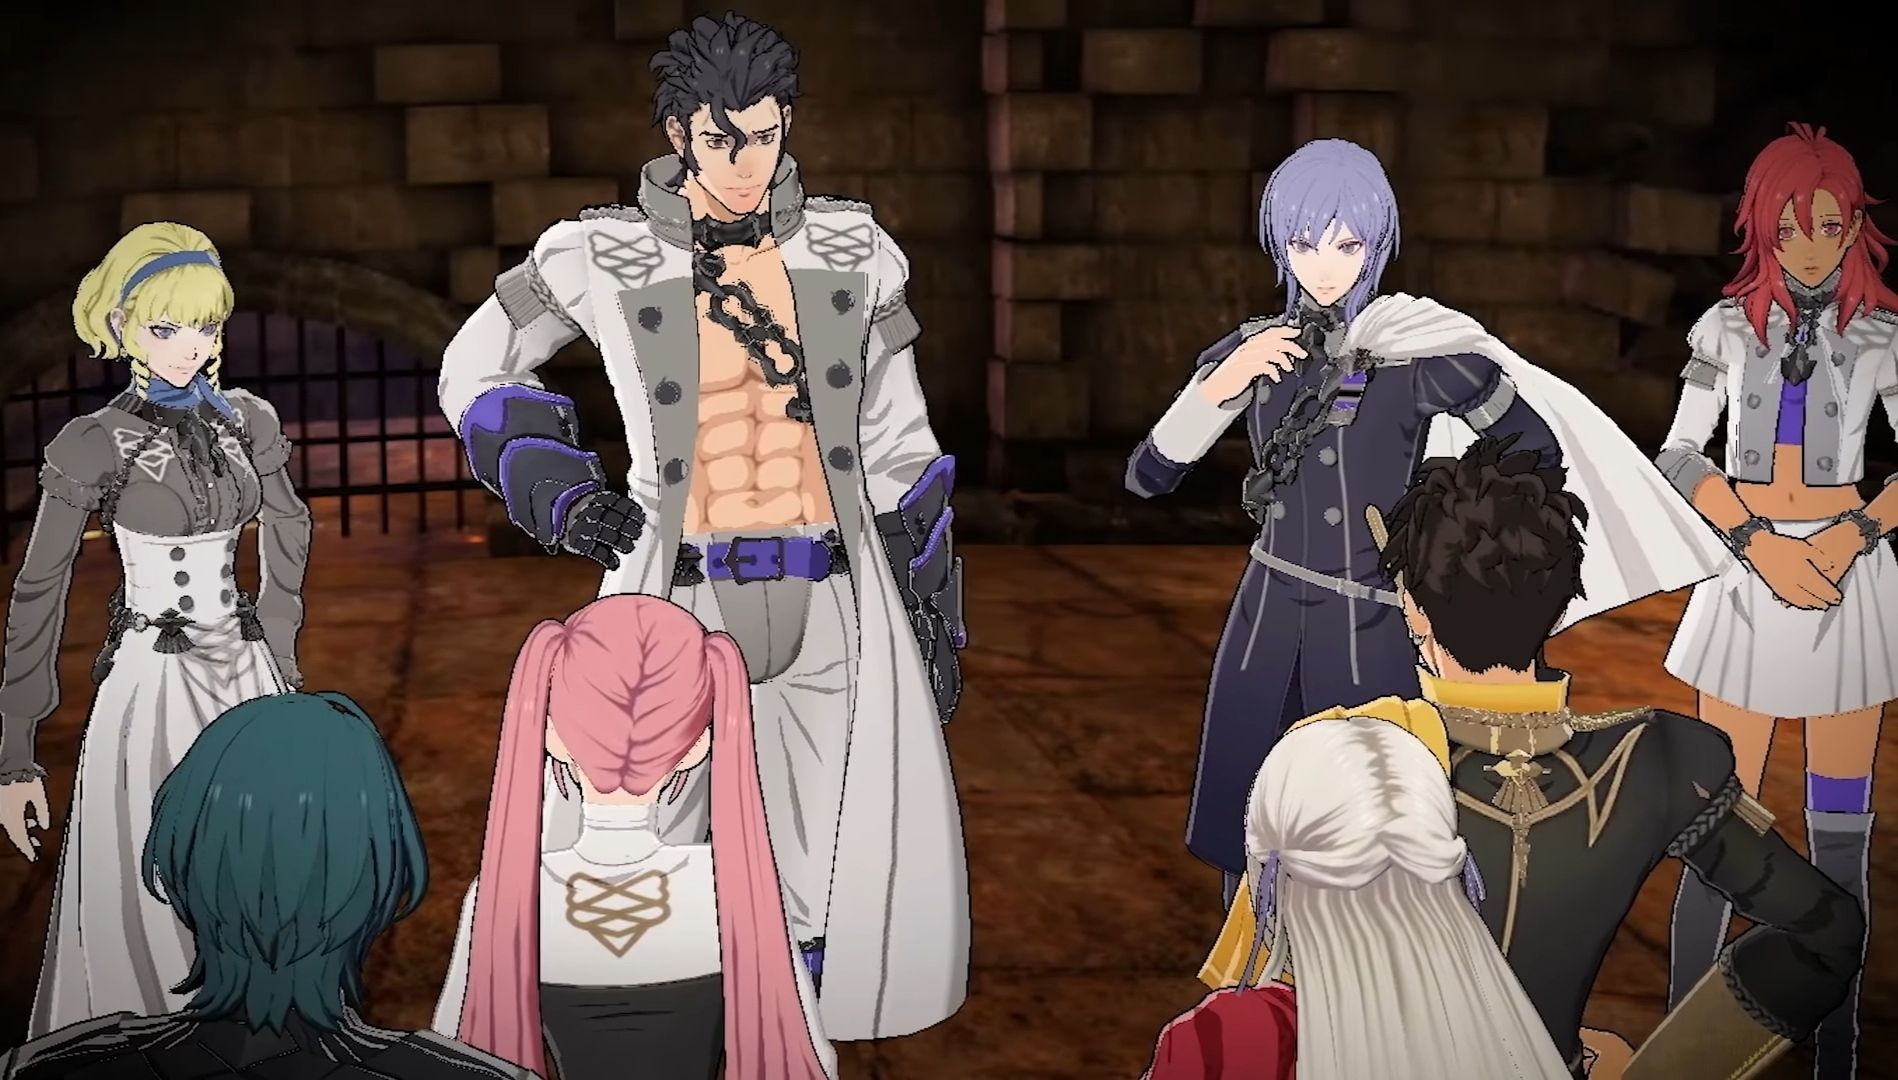 Fire Emblem: Three Houses DLC adds the 'Ashen Wolves' fourth house